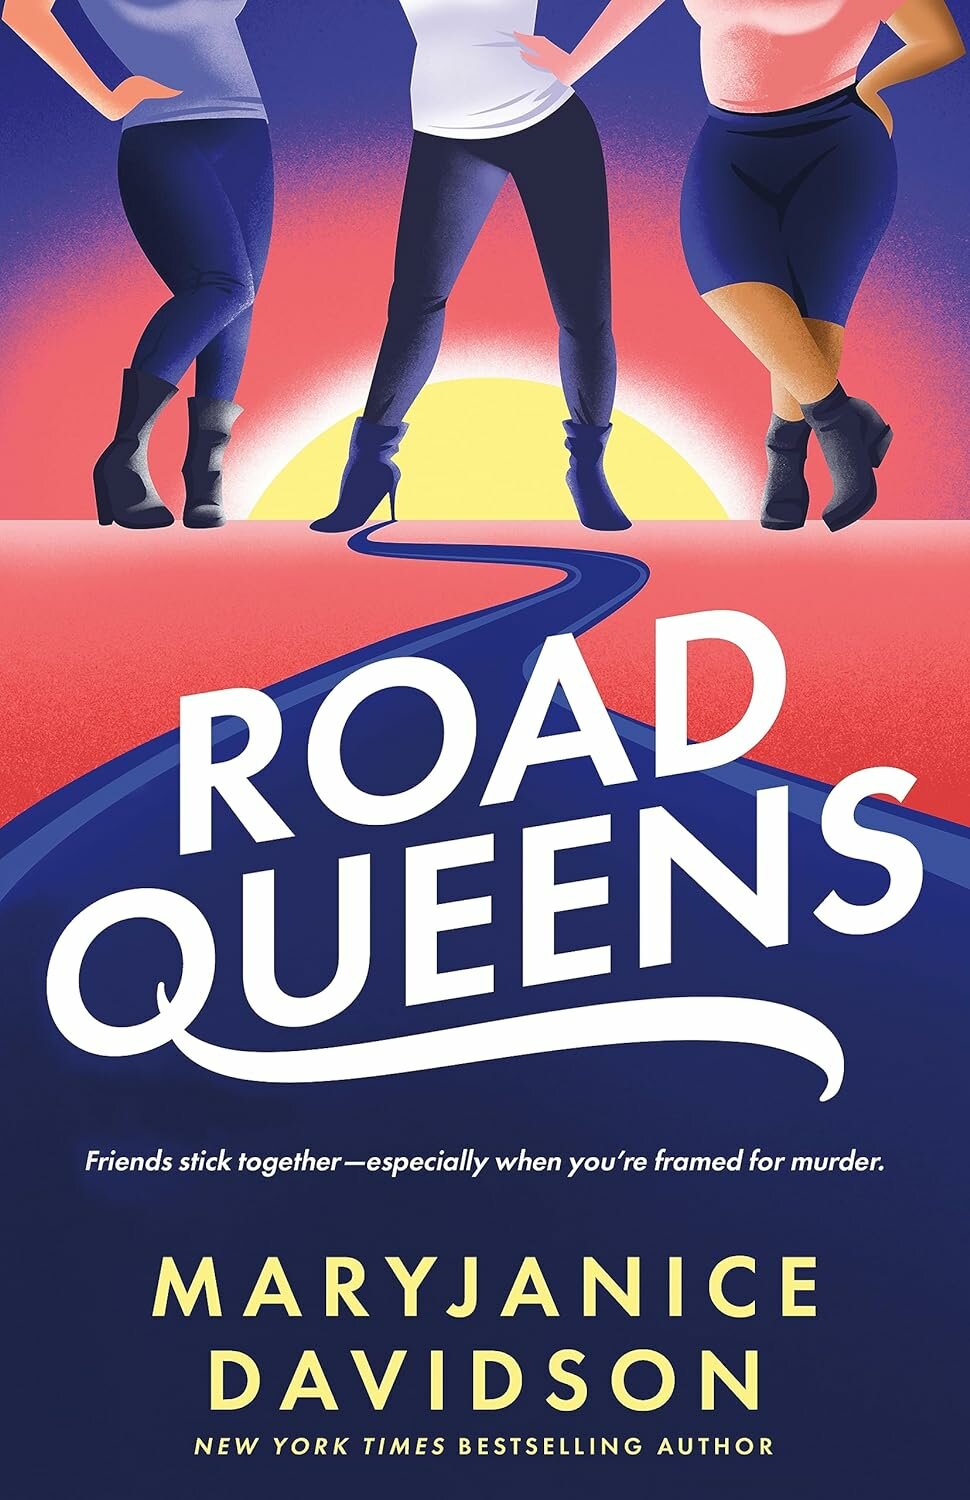 The cover to Road Queens, a new book by MaryJanice Davidson of Hastings. The book is set in Prescott, with characters visiting popular attractions.